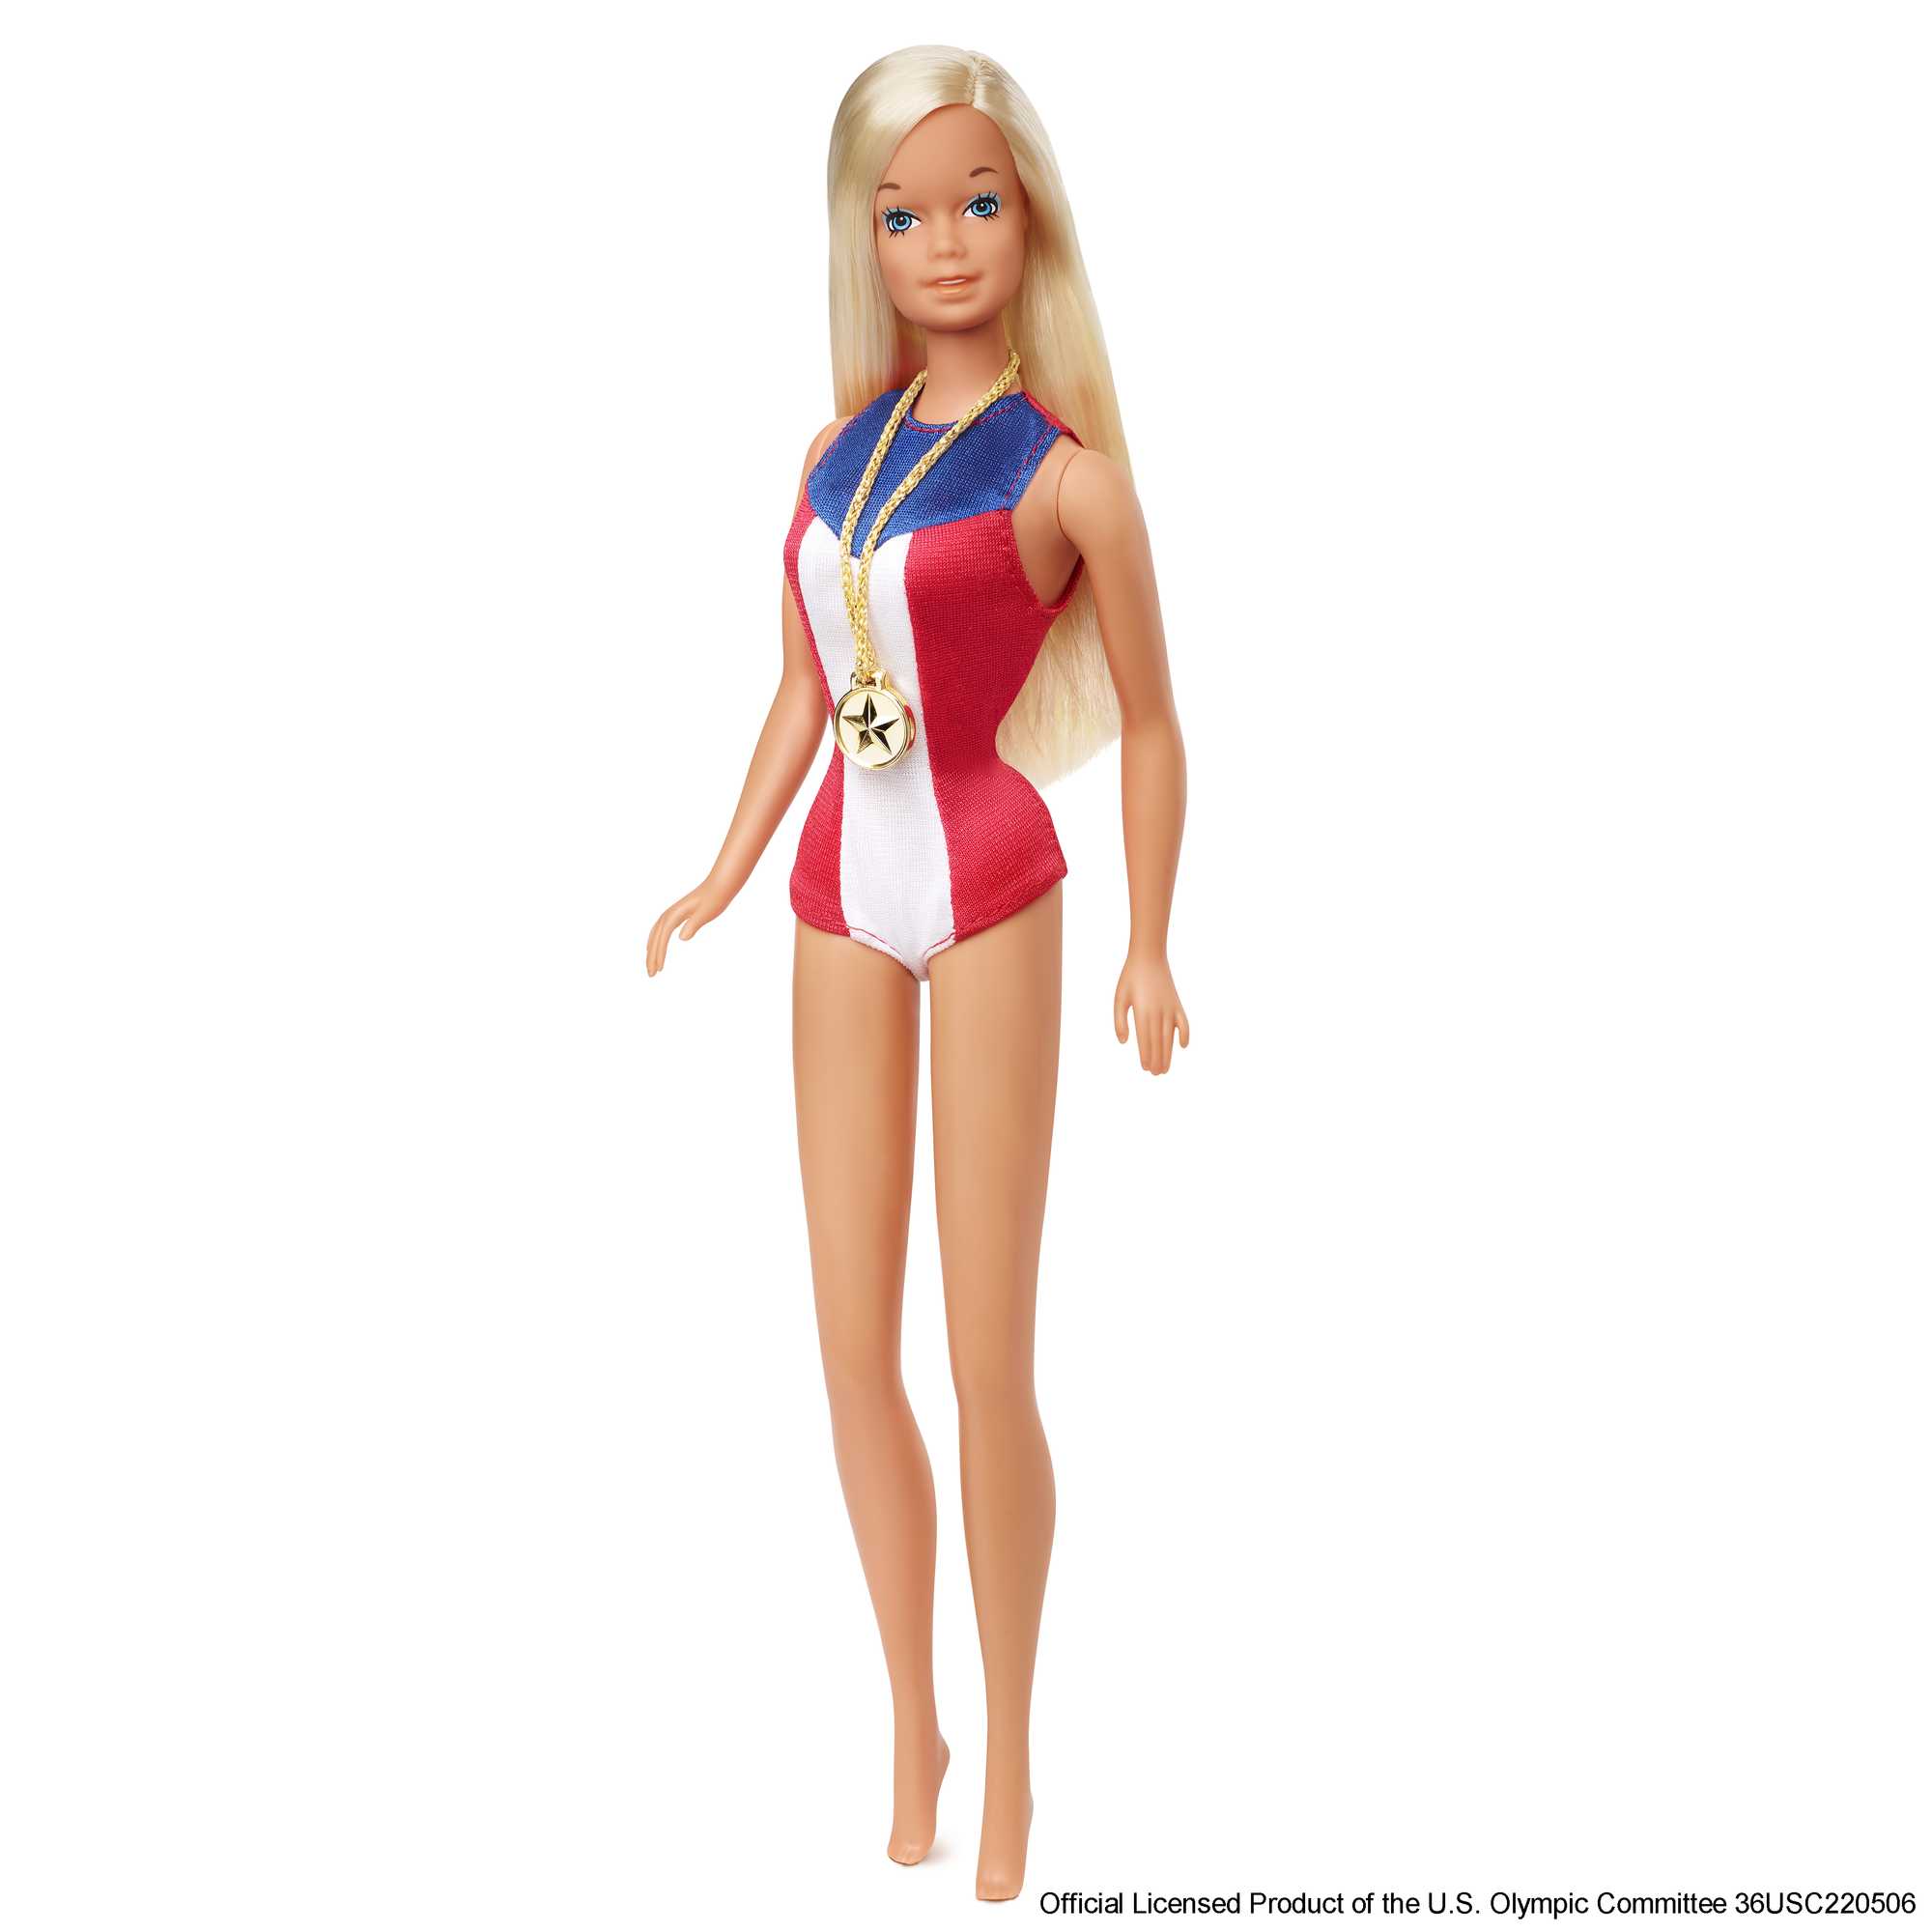 Barbie Signature 1975 Gold Medal Reproduction Barbie Doll with Red, White & Blue Leotard - image 1 of 7